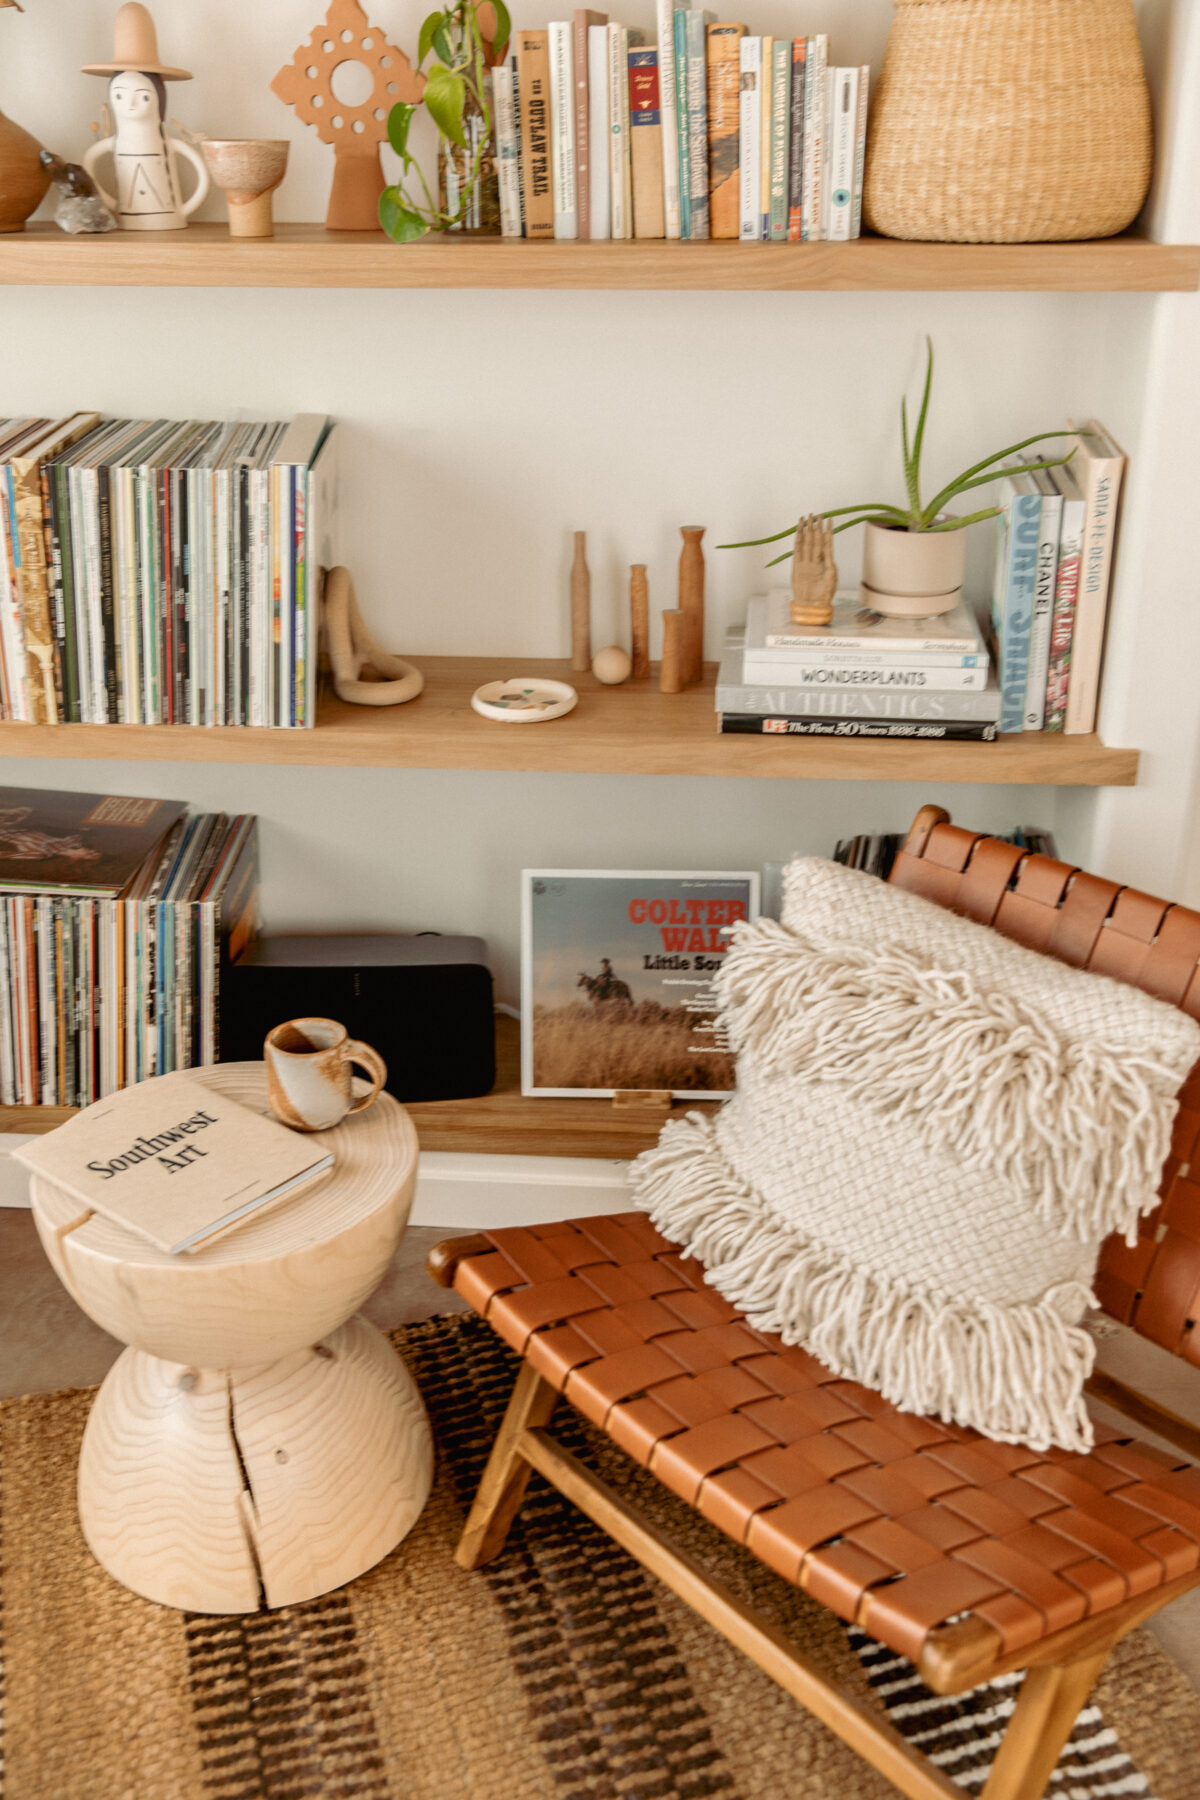 Desert Home Build: Open Shelving and Our Built-in Look